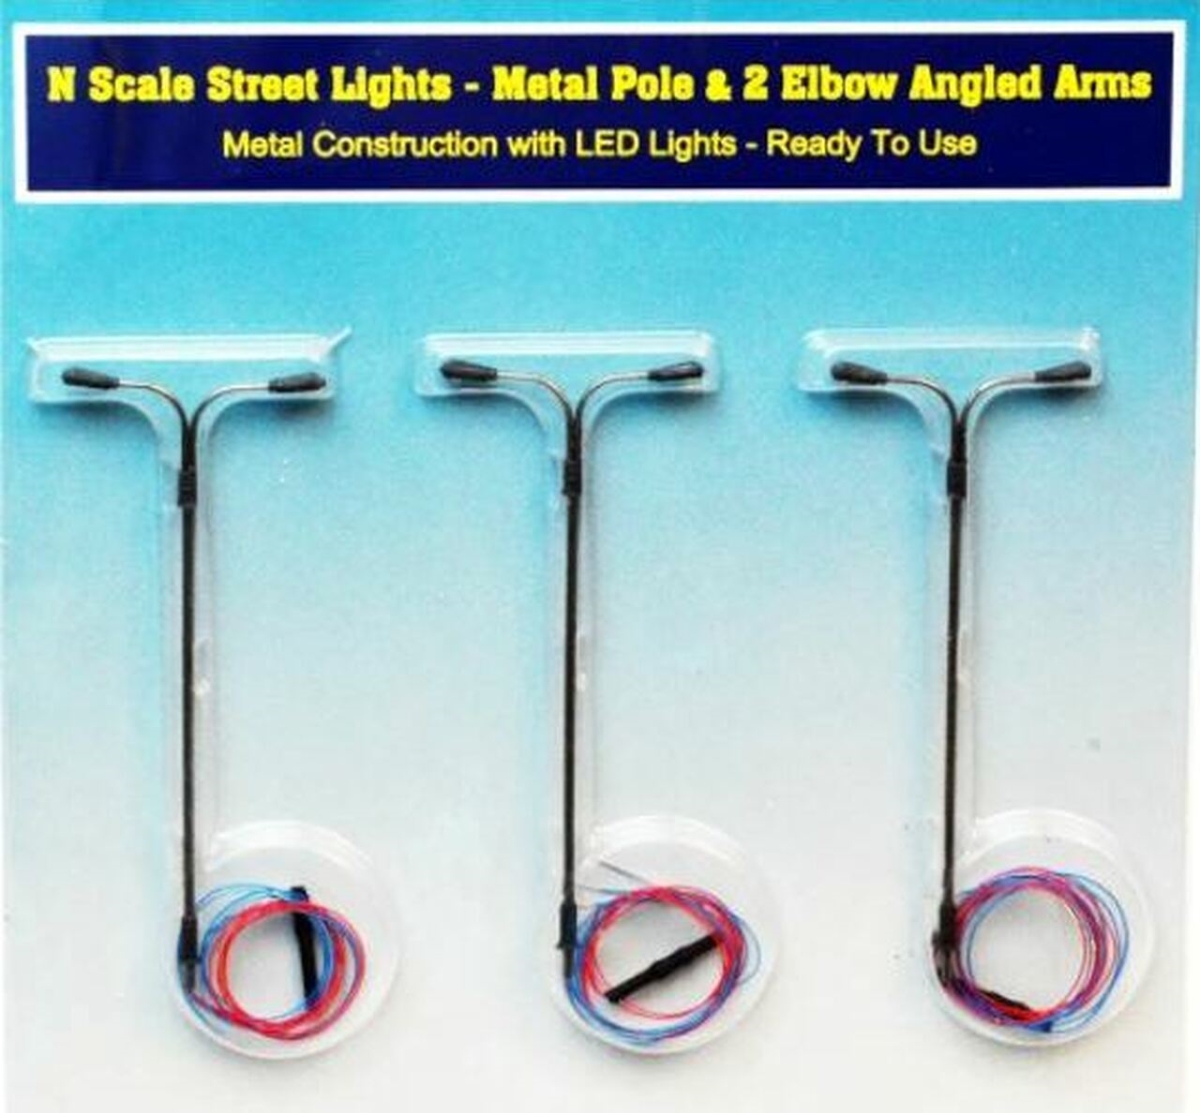 Picture of Rock Island Hobby RIH013102 N Scale Street Lights with Two Elbow-Angled Arms